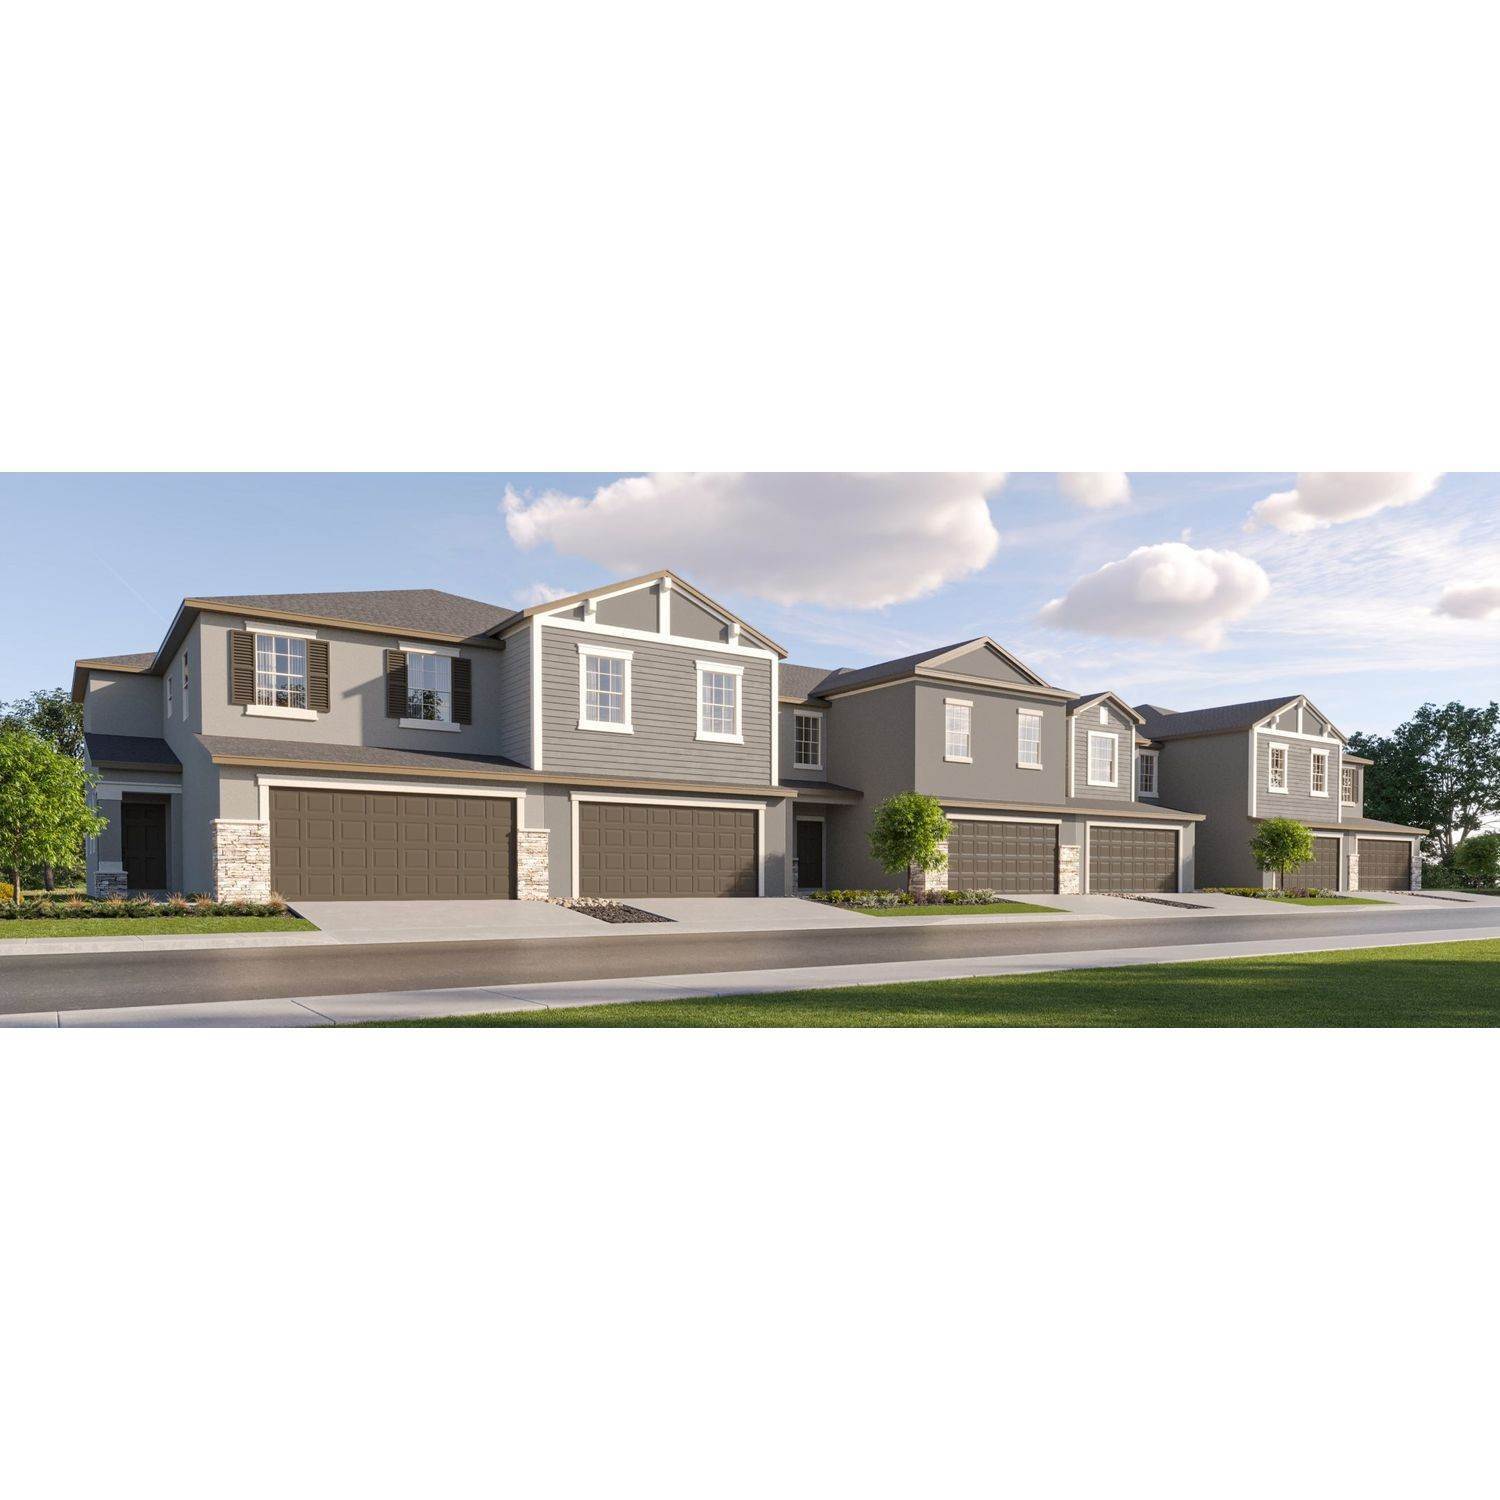 Angeline - The Townhomes здание в 17516 Nectar Flume Drive, Land O' Lakes, FL 34638